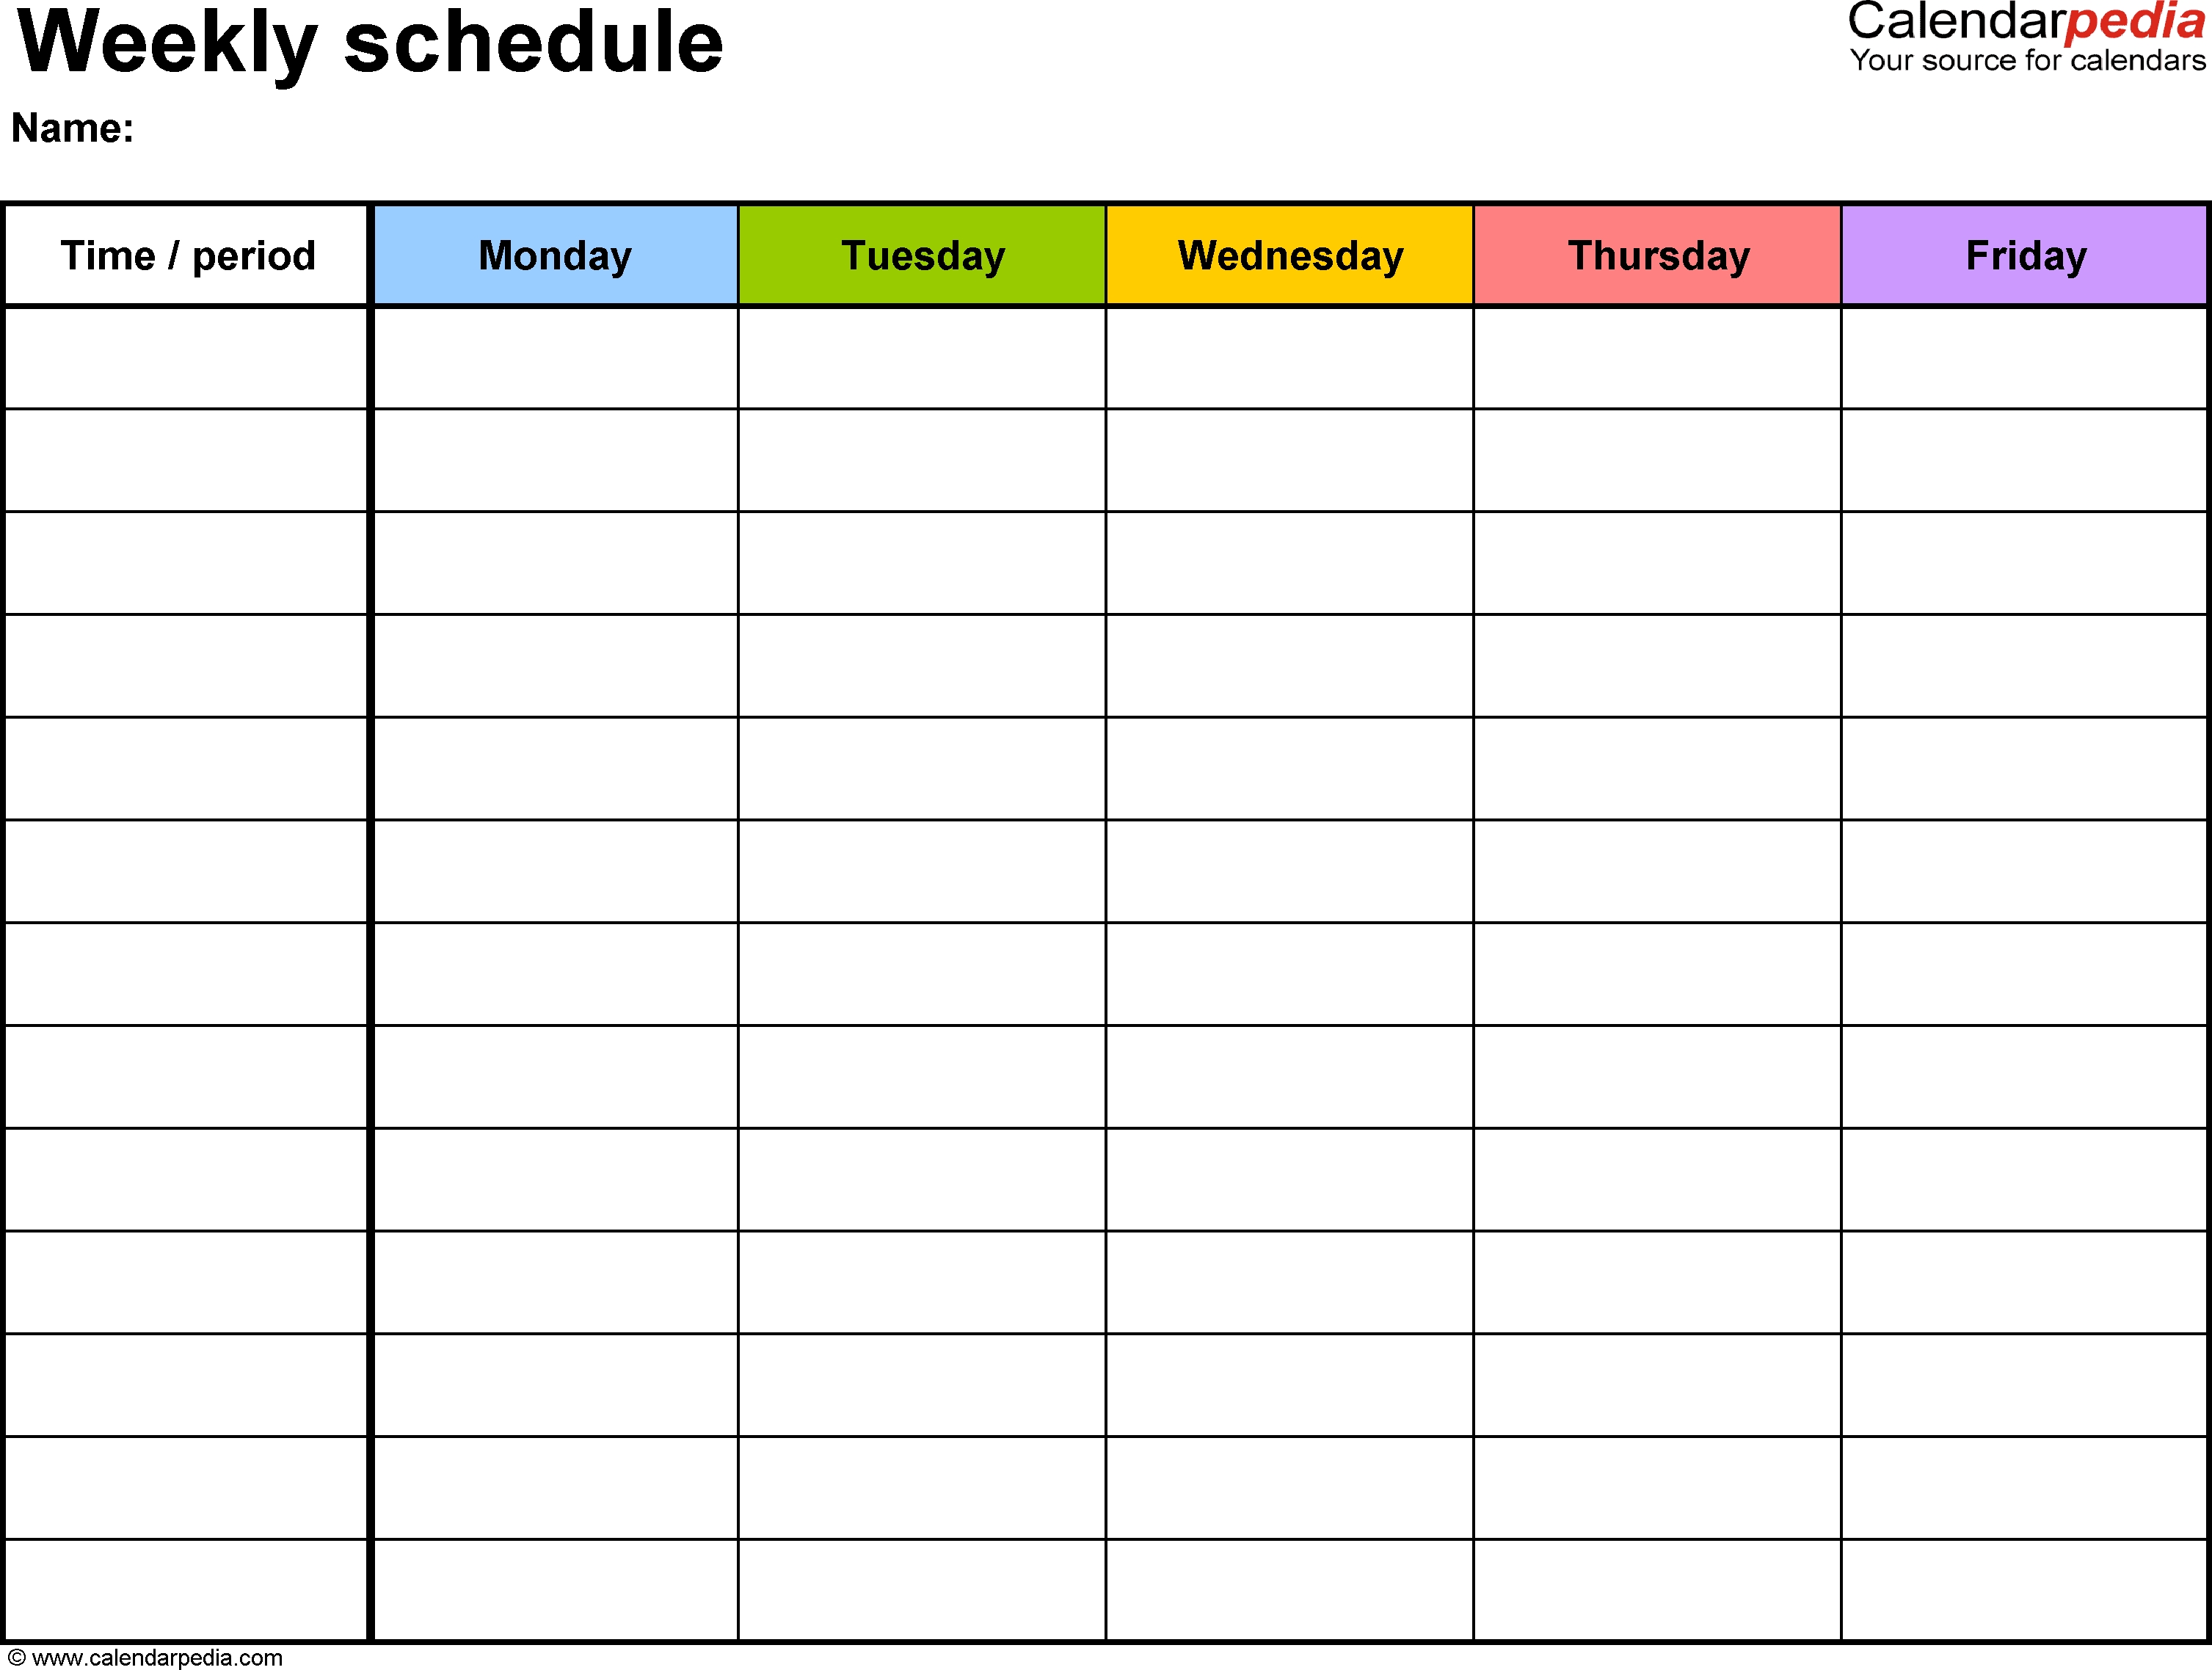 Free Weekly Schedule Templates For Word - 18 Templates intended for Weekly Calendar Template Monday Thru Friday